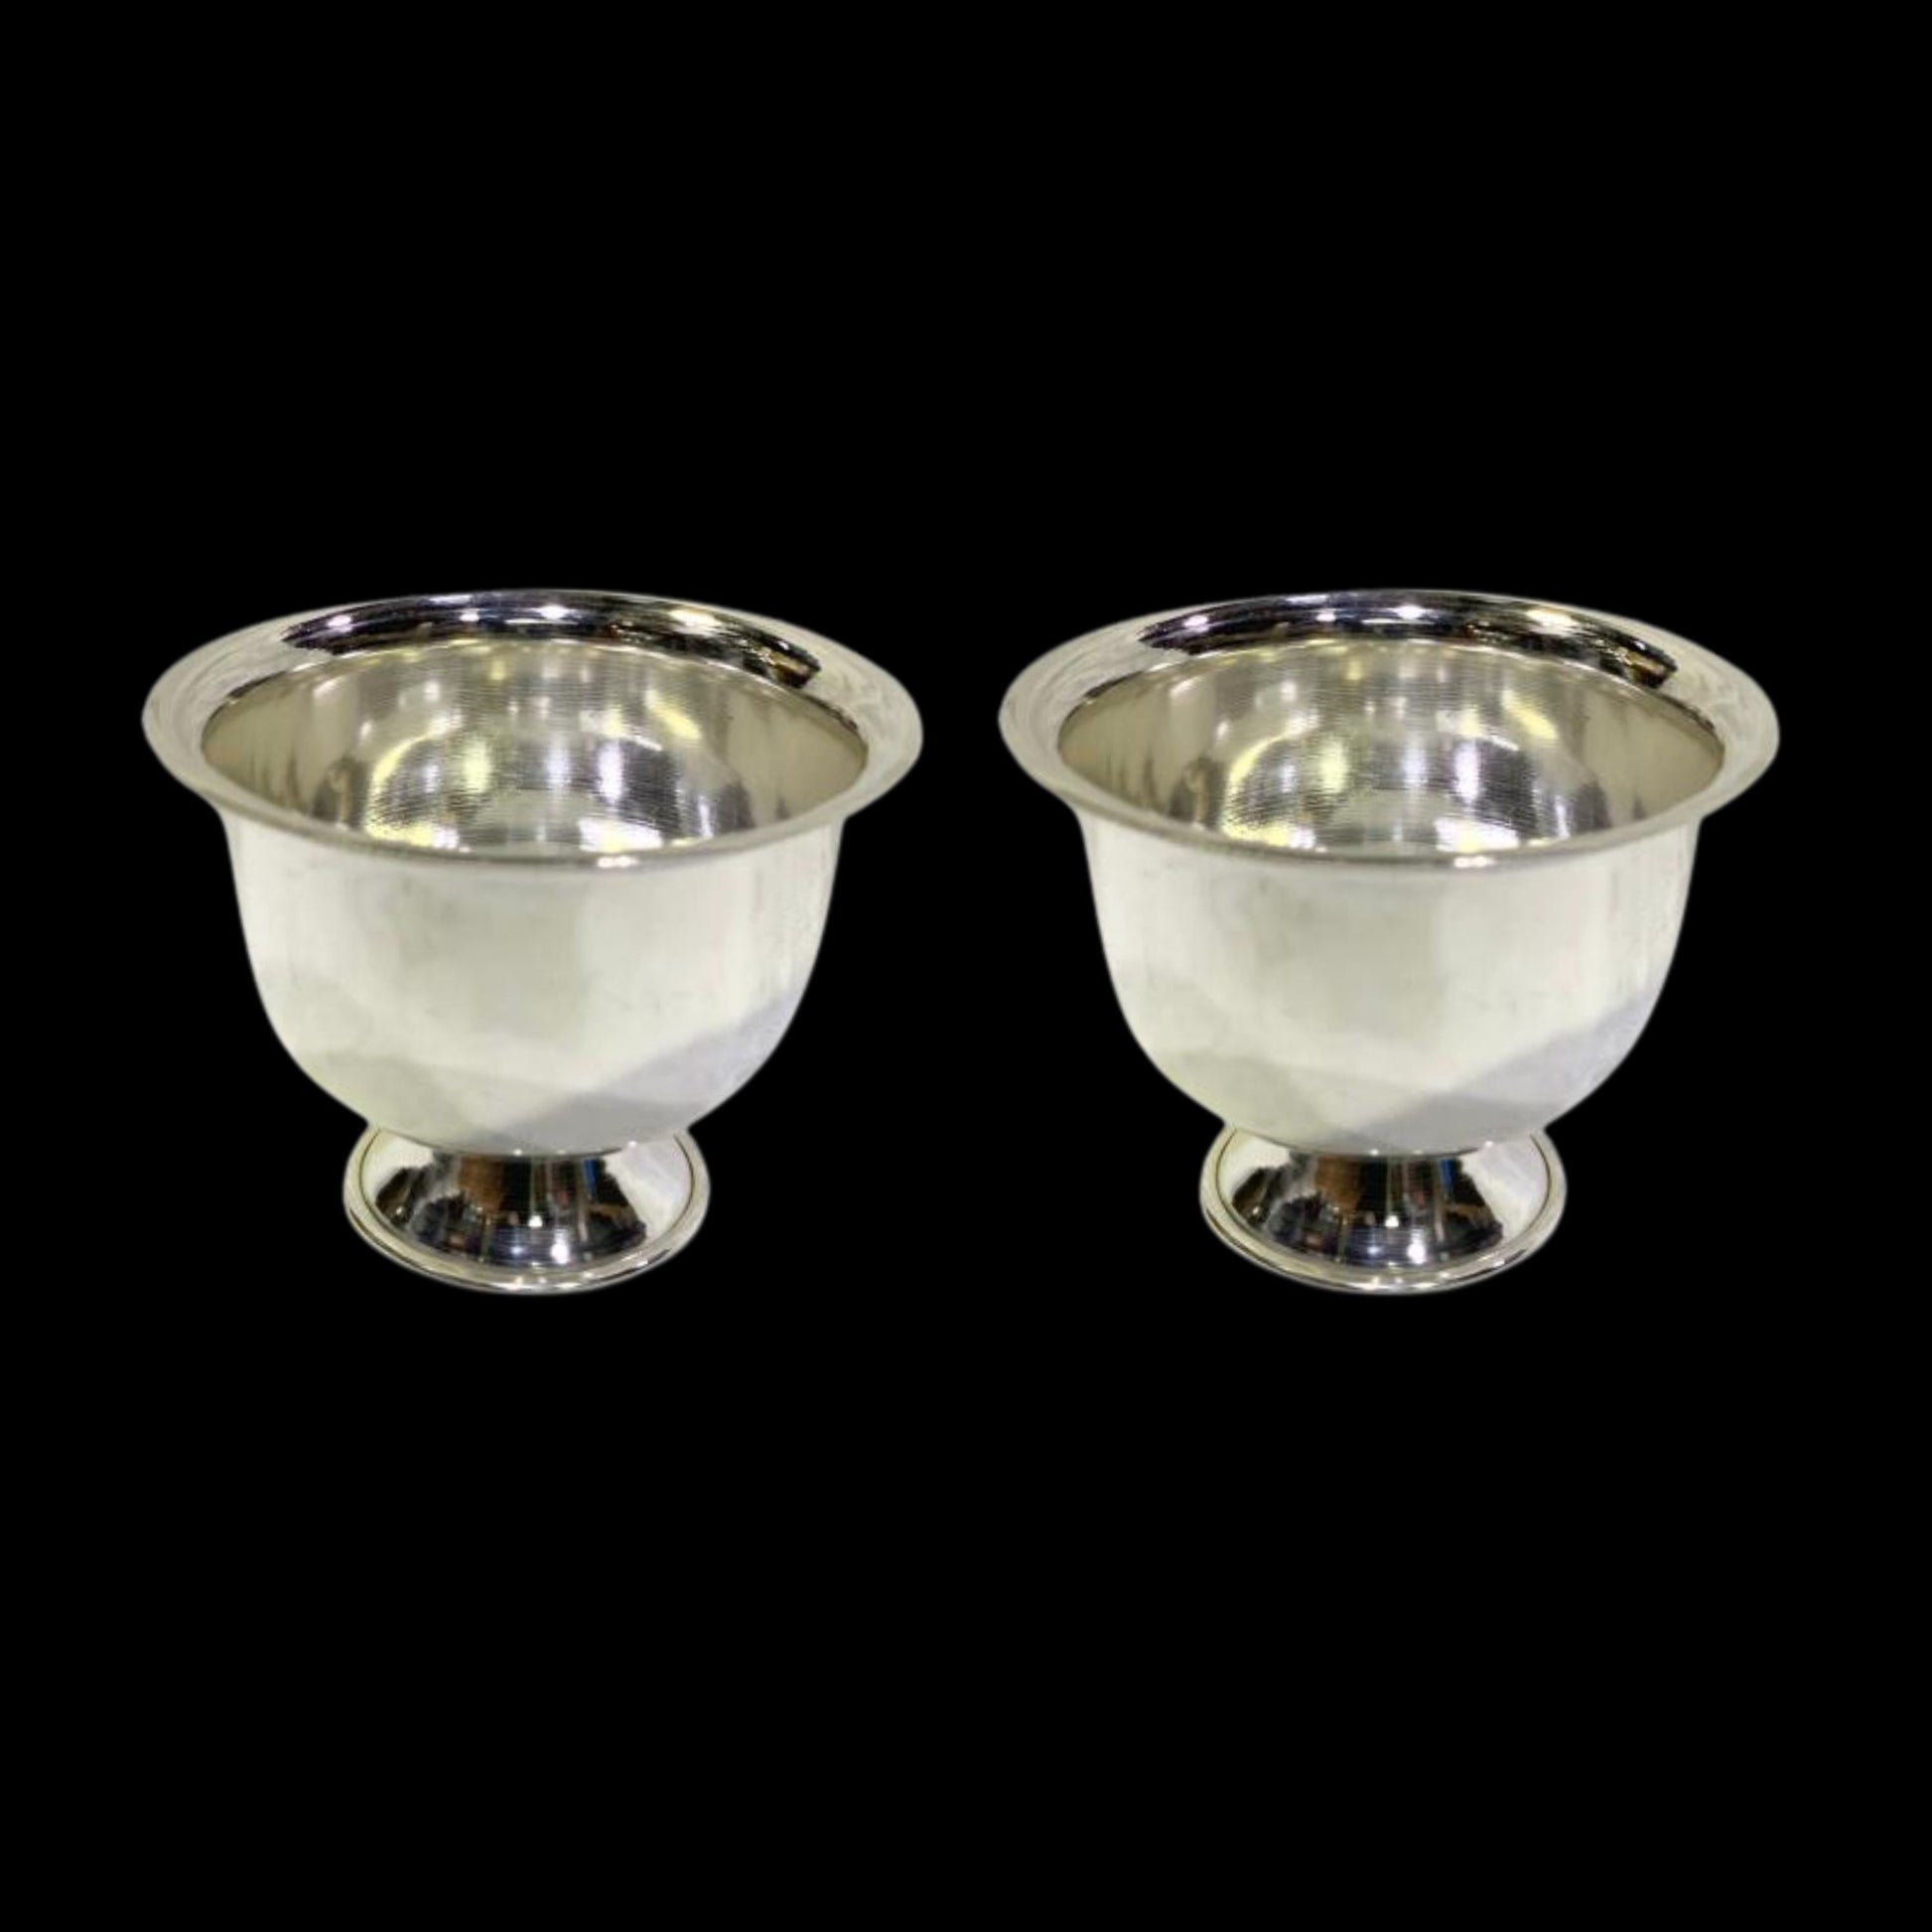 Buy 92.5 Pure Silver Articles at Wholesale Price Online  925 Sterling  Silver Padam Cups for Pooja [Set of 2] - 40 grams –